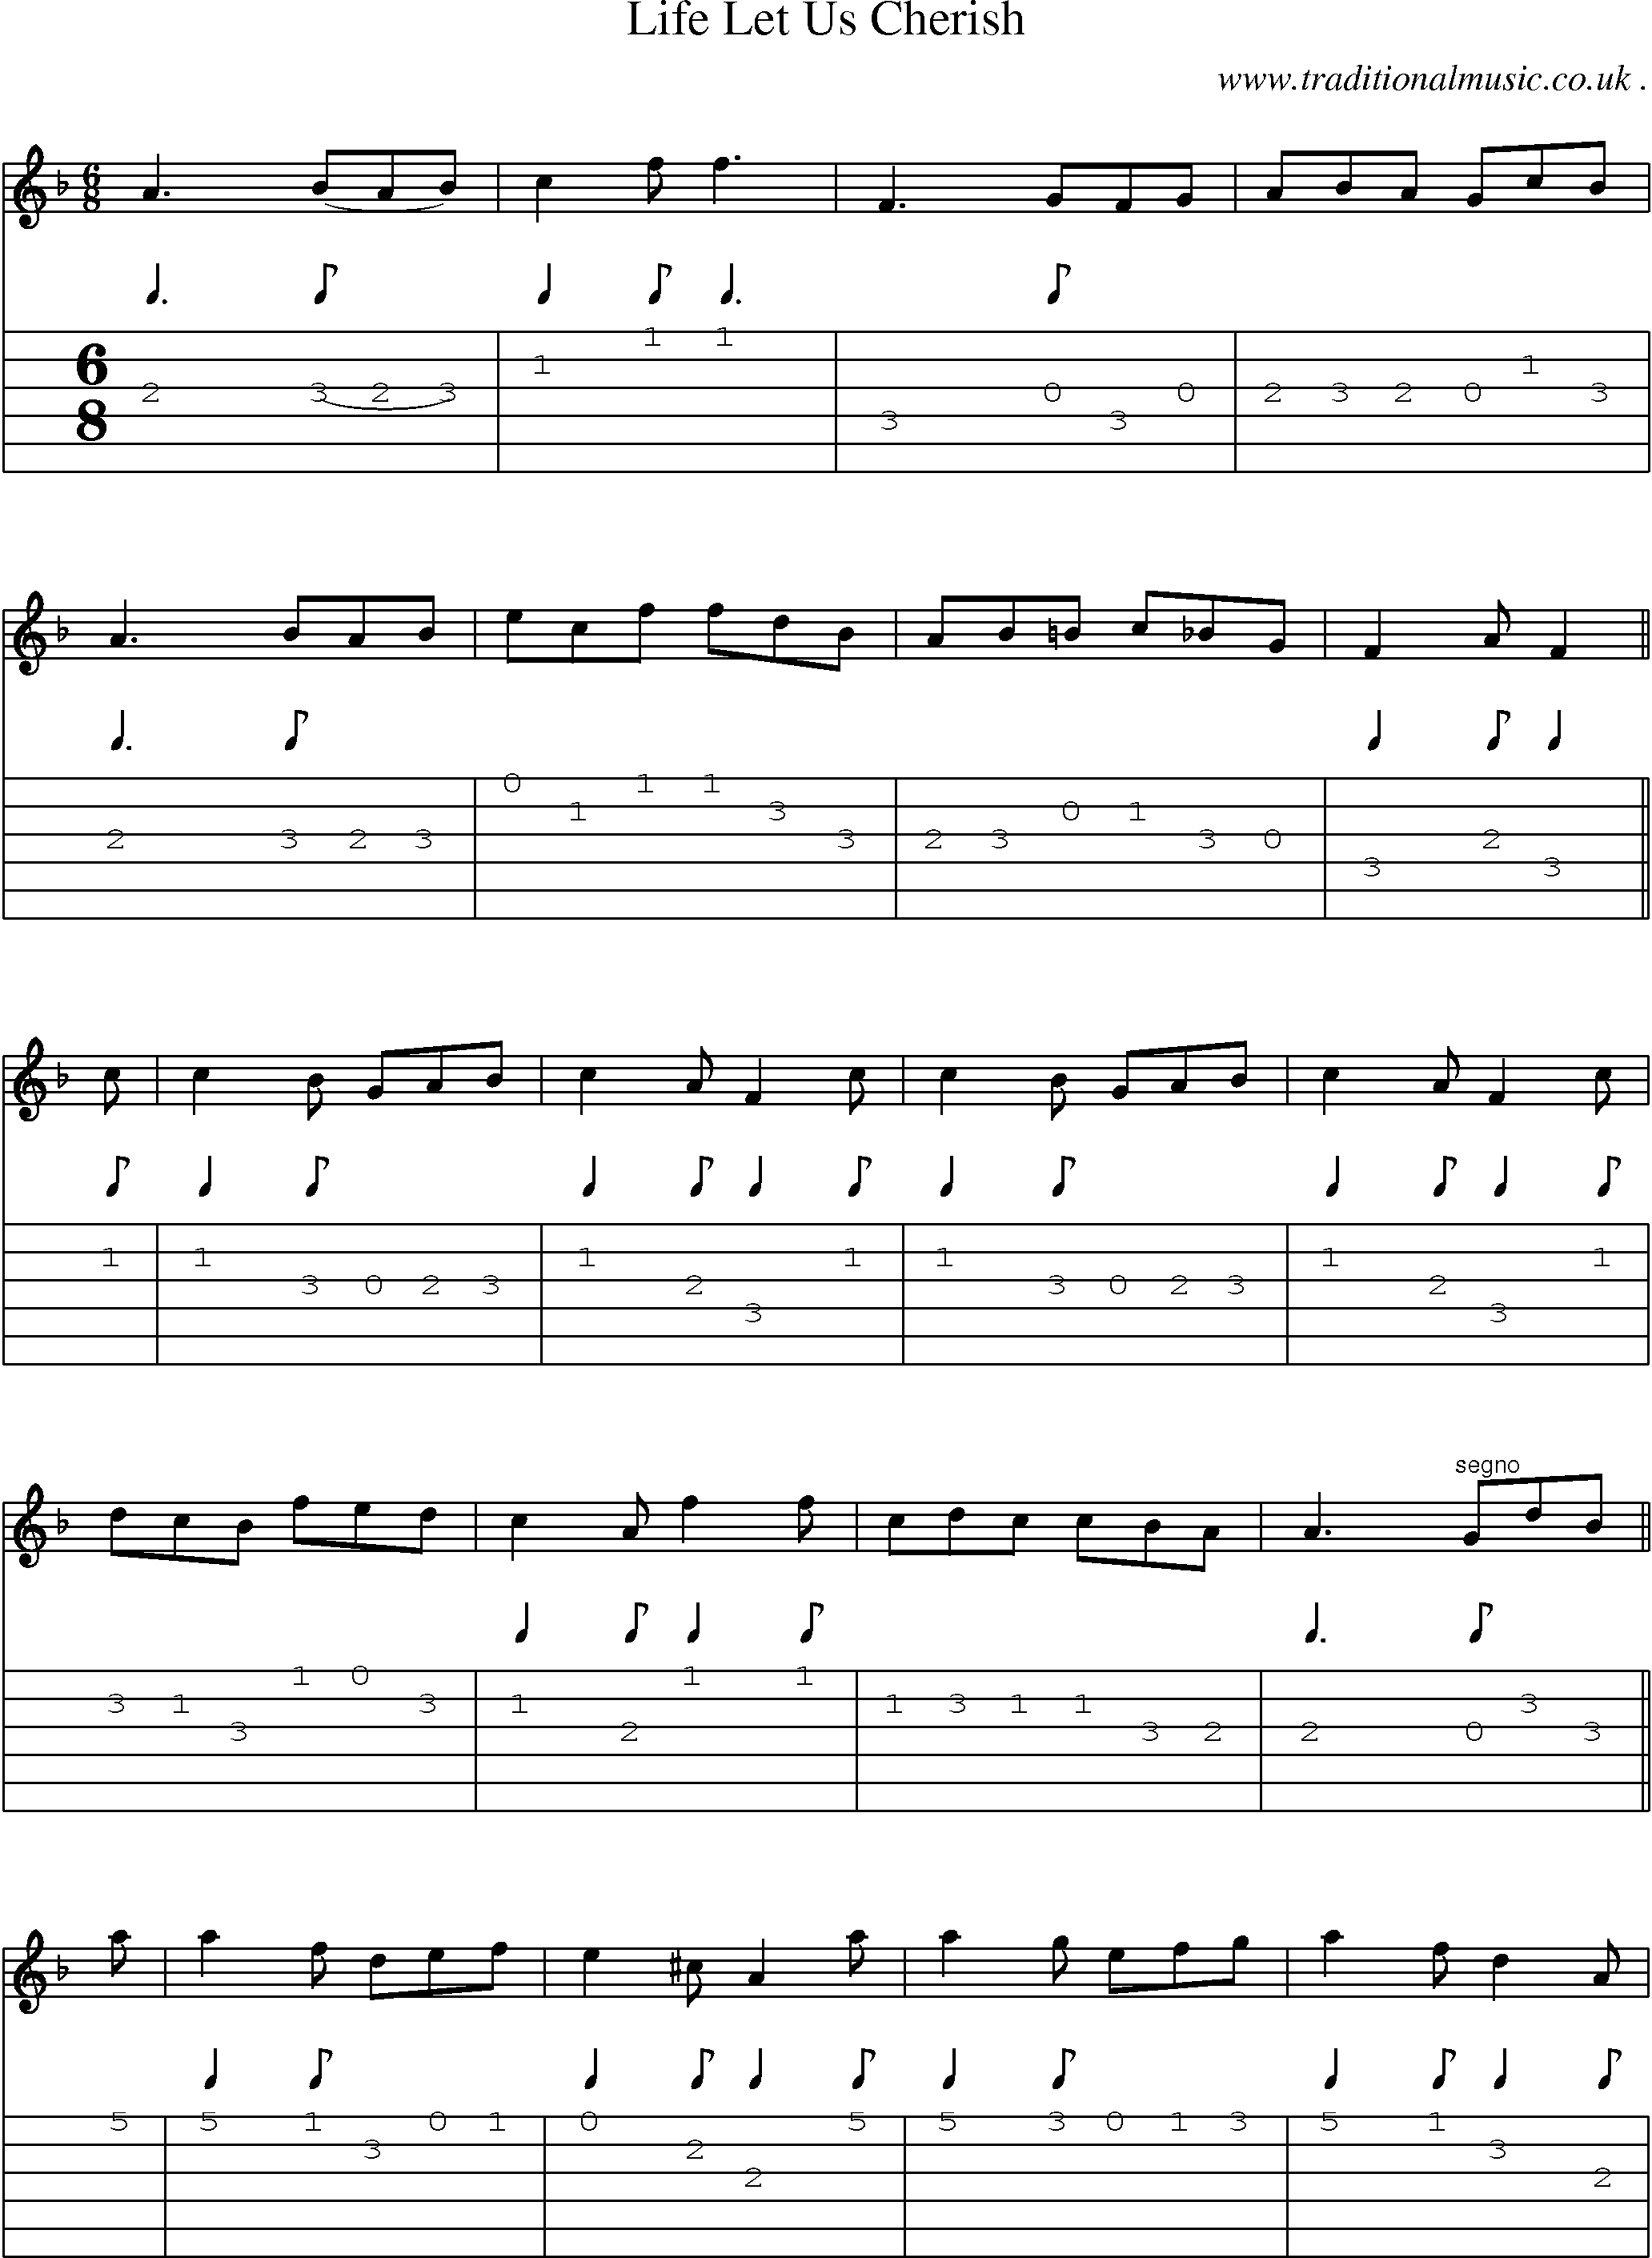 Sheet-Music and Guitar Tabs for Life Let Us Cherish